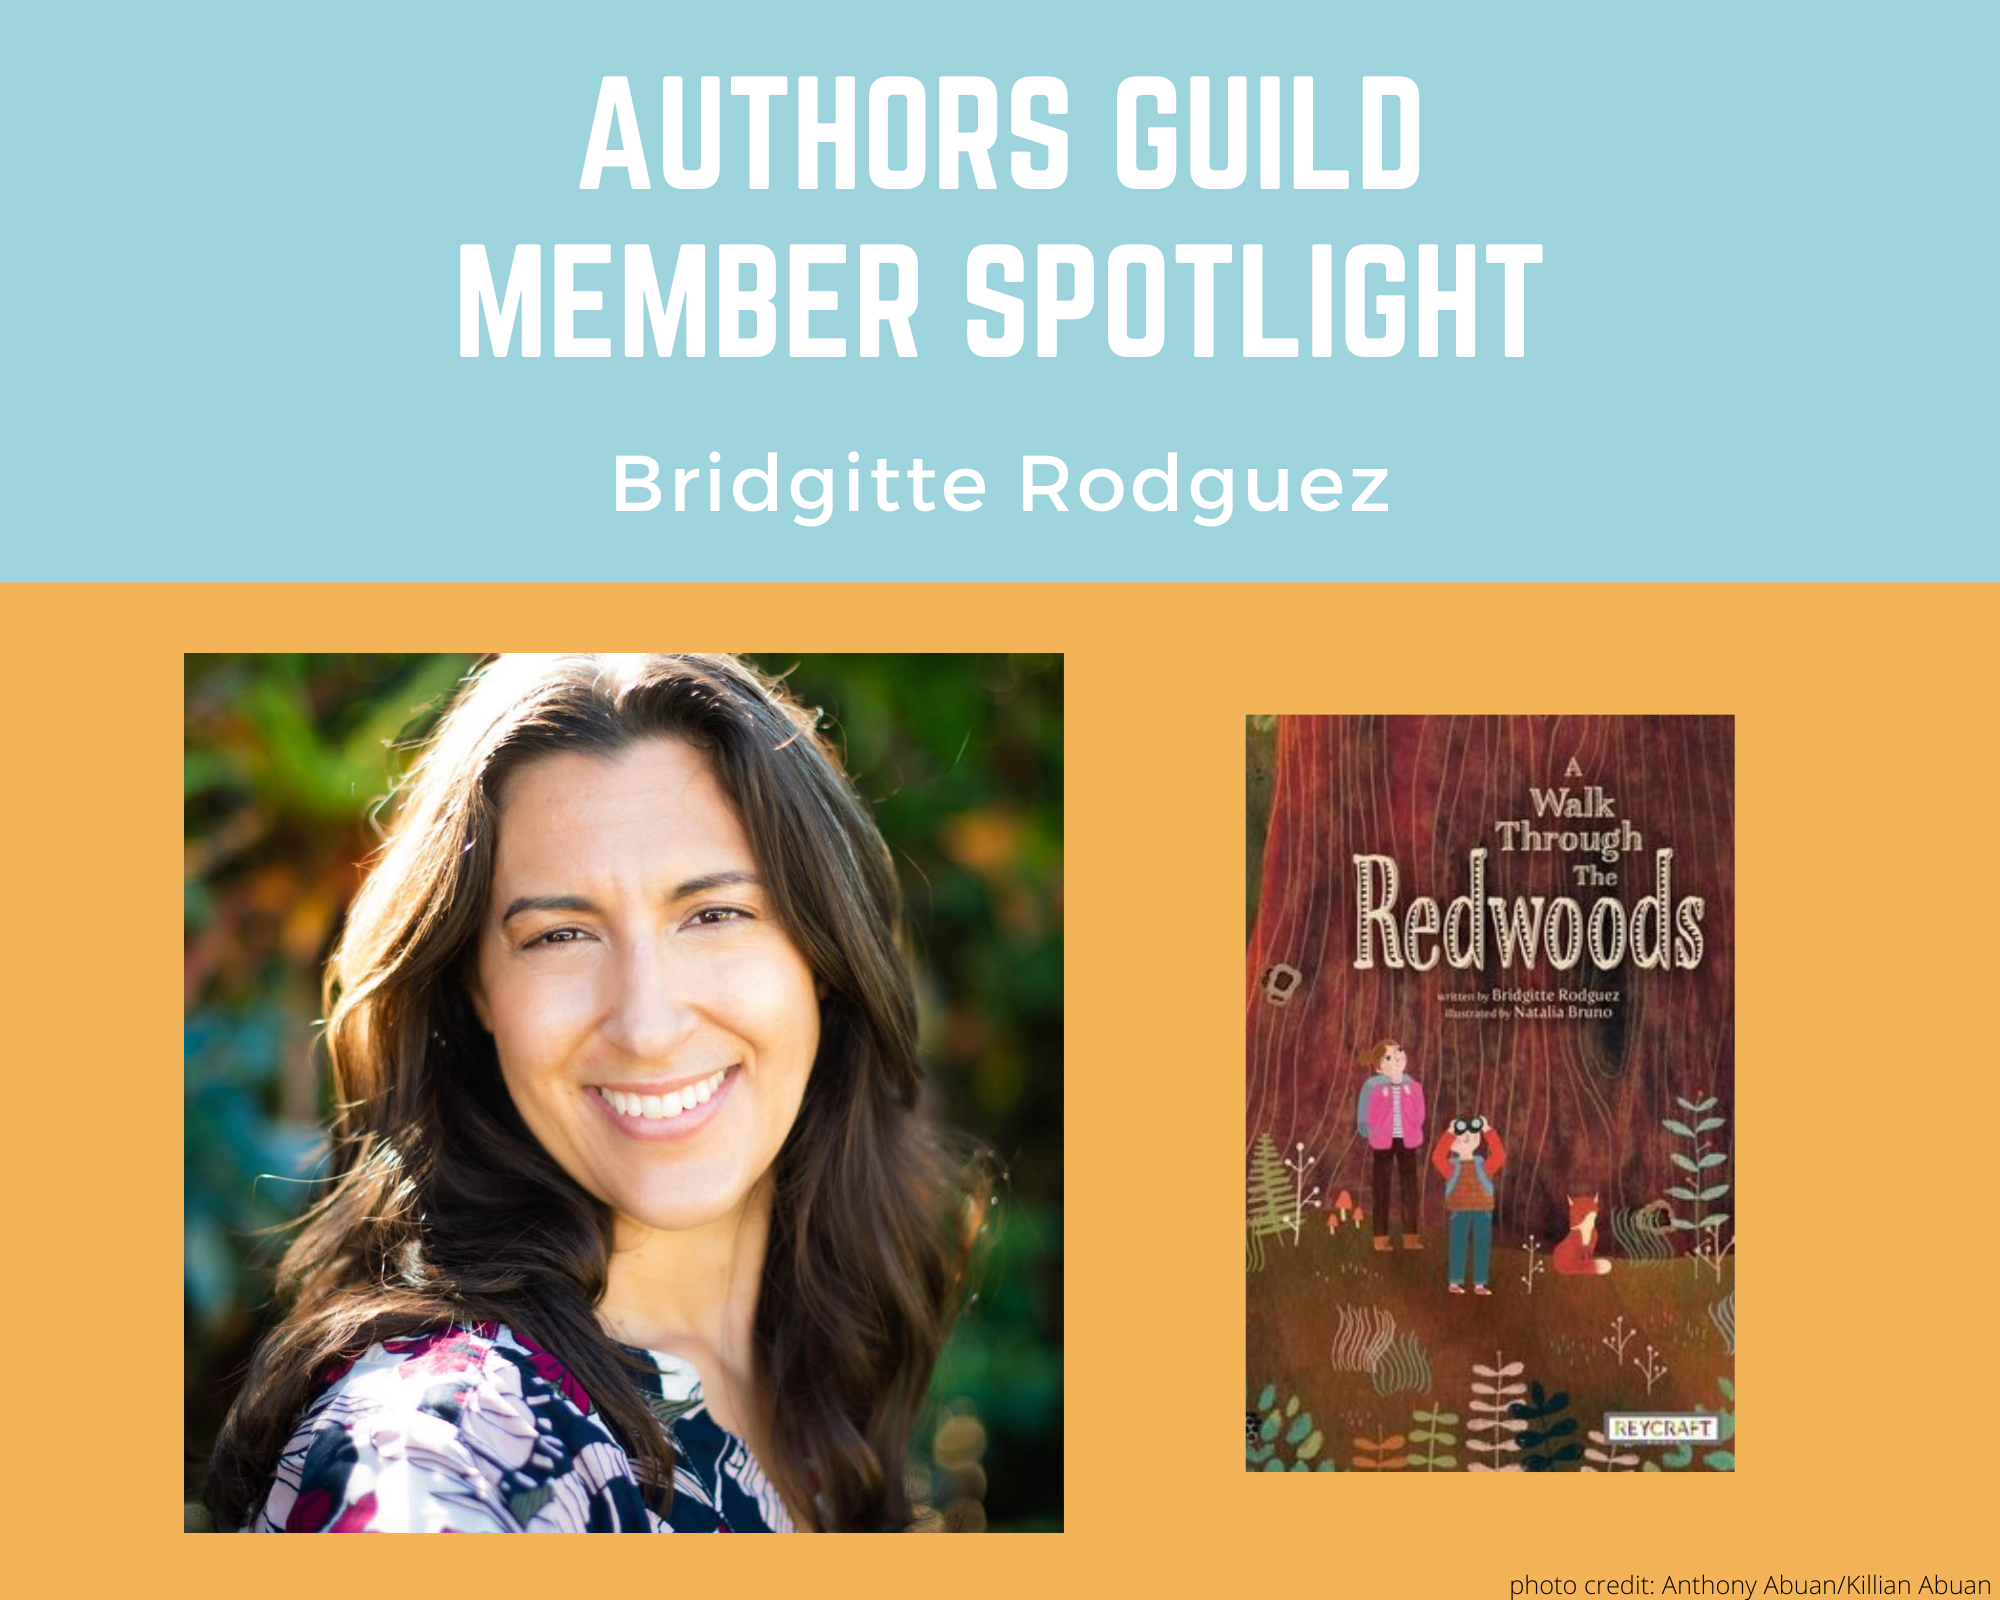 author Bridgitte Rodguez and an image of her book A Walk Through the Redwoods